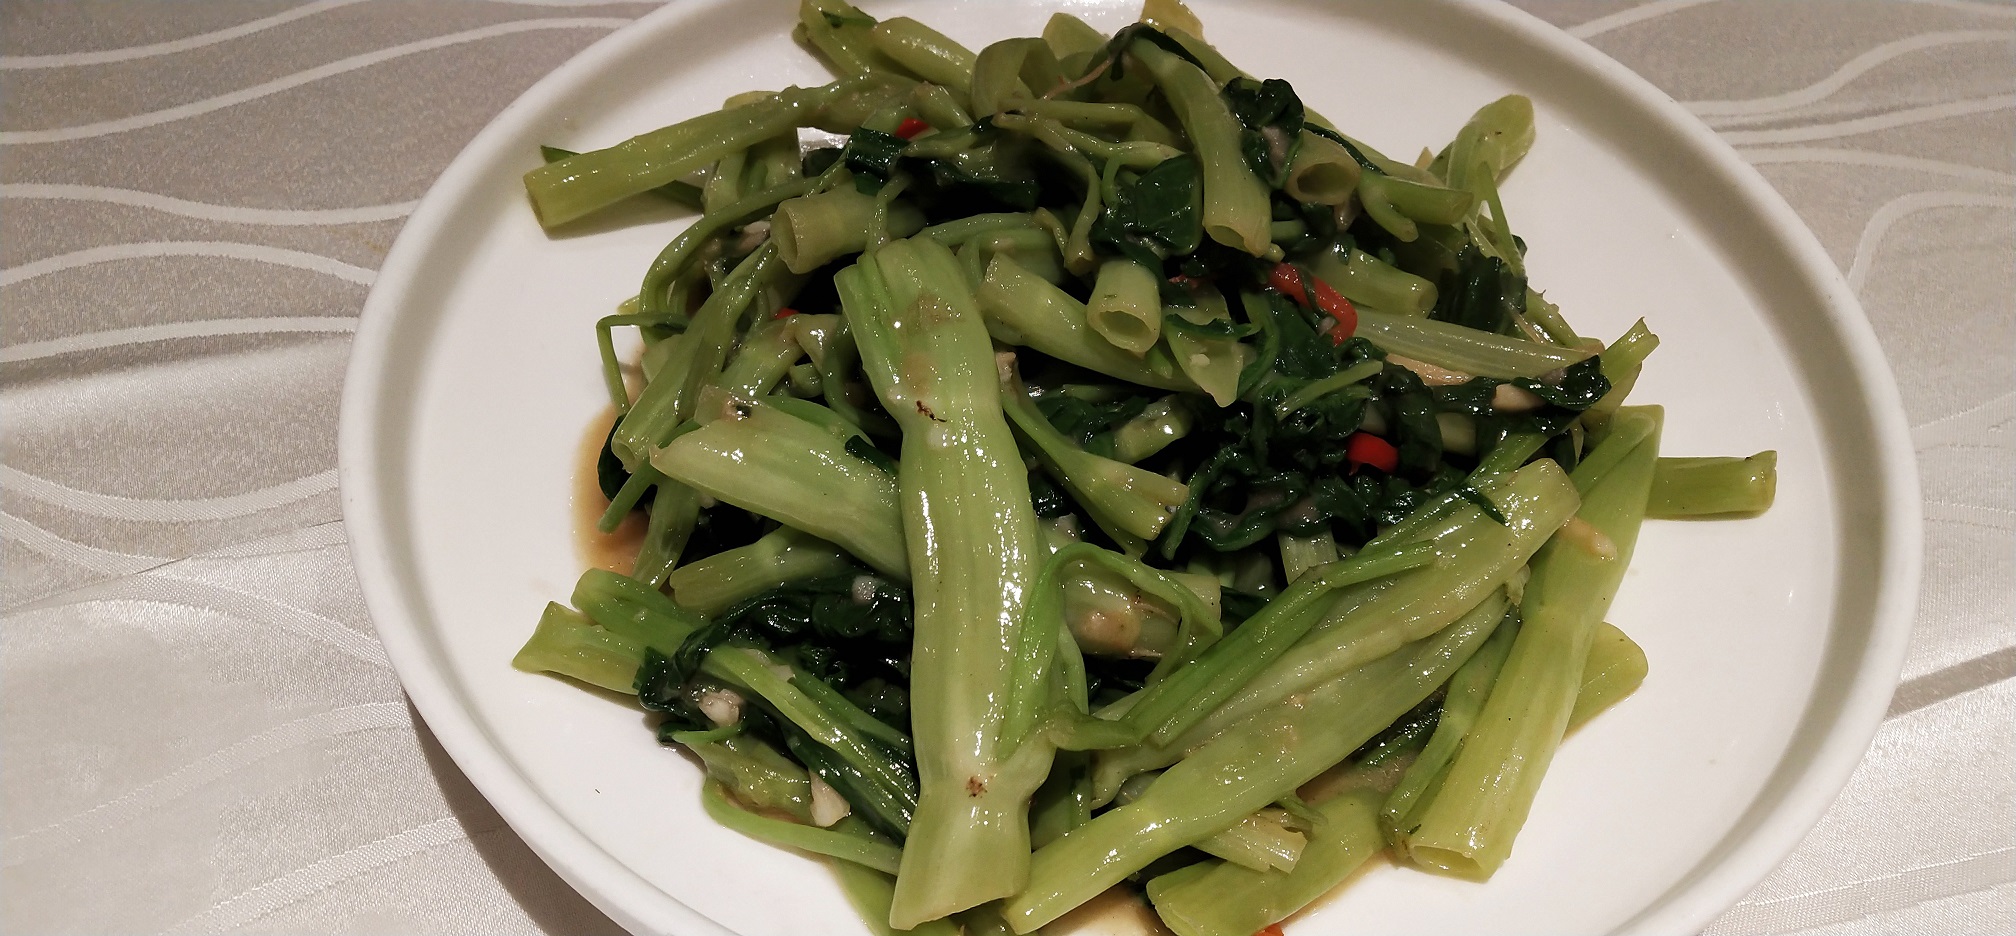 Green Stir-fried Water Spinach with Chili in Fermented Bean Curd Sauce